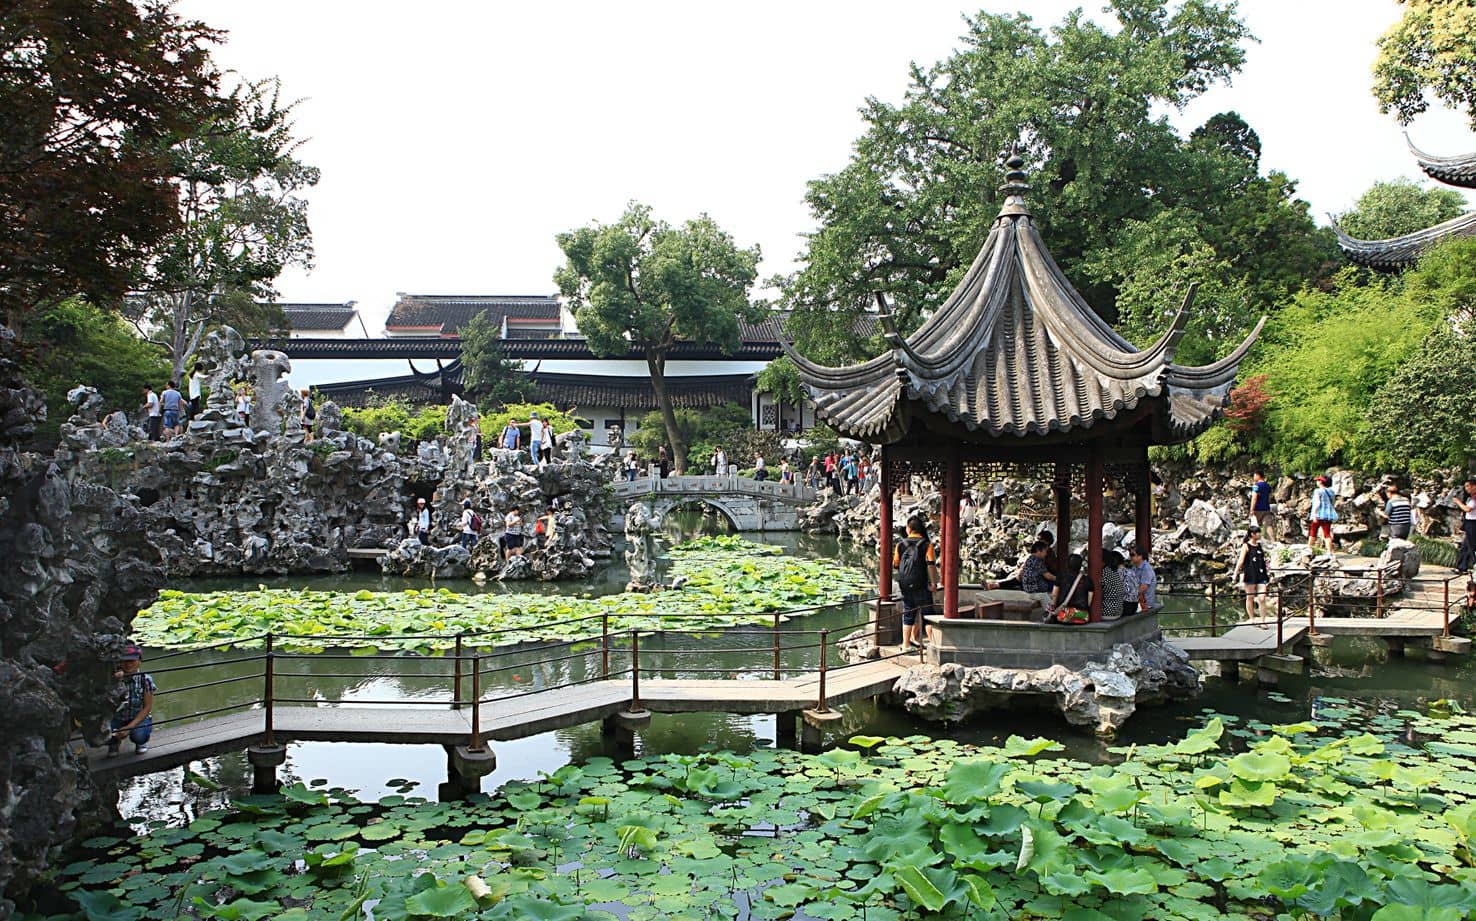 A Pond in a Beautiful Garden in China